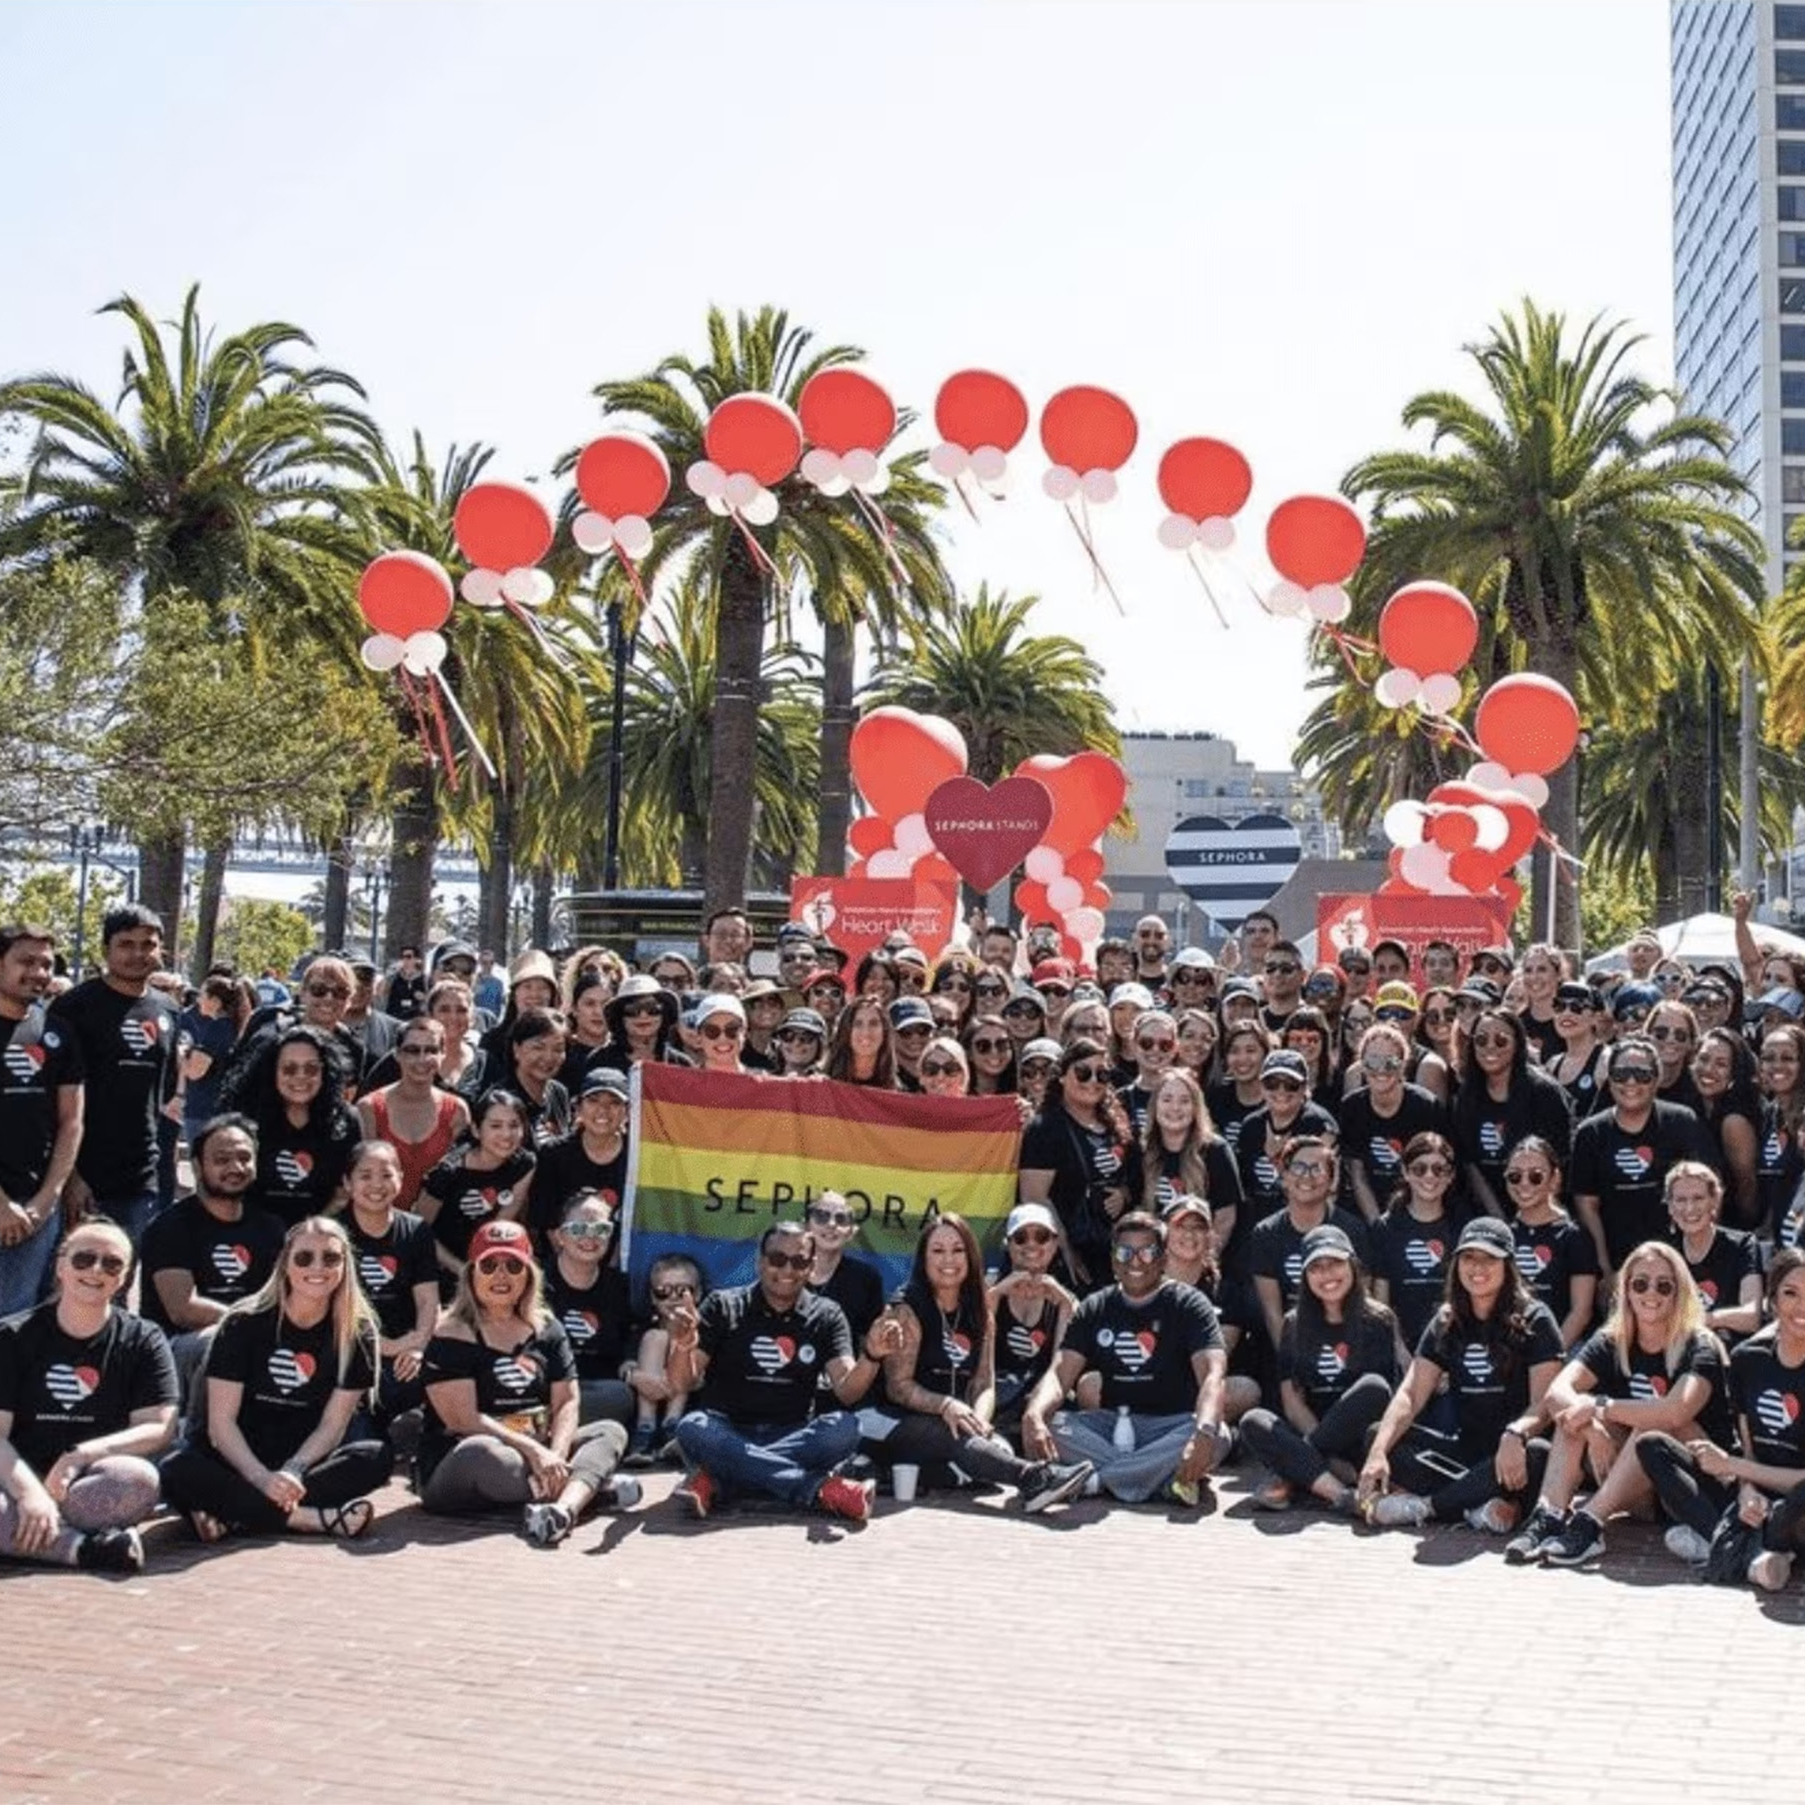 Large group of employees from Sephora with red balloons and a pride flag that has the word Sephora on it